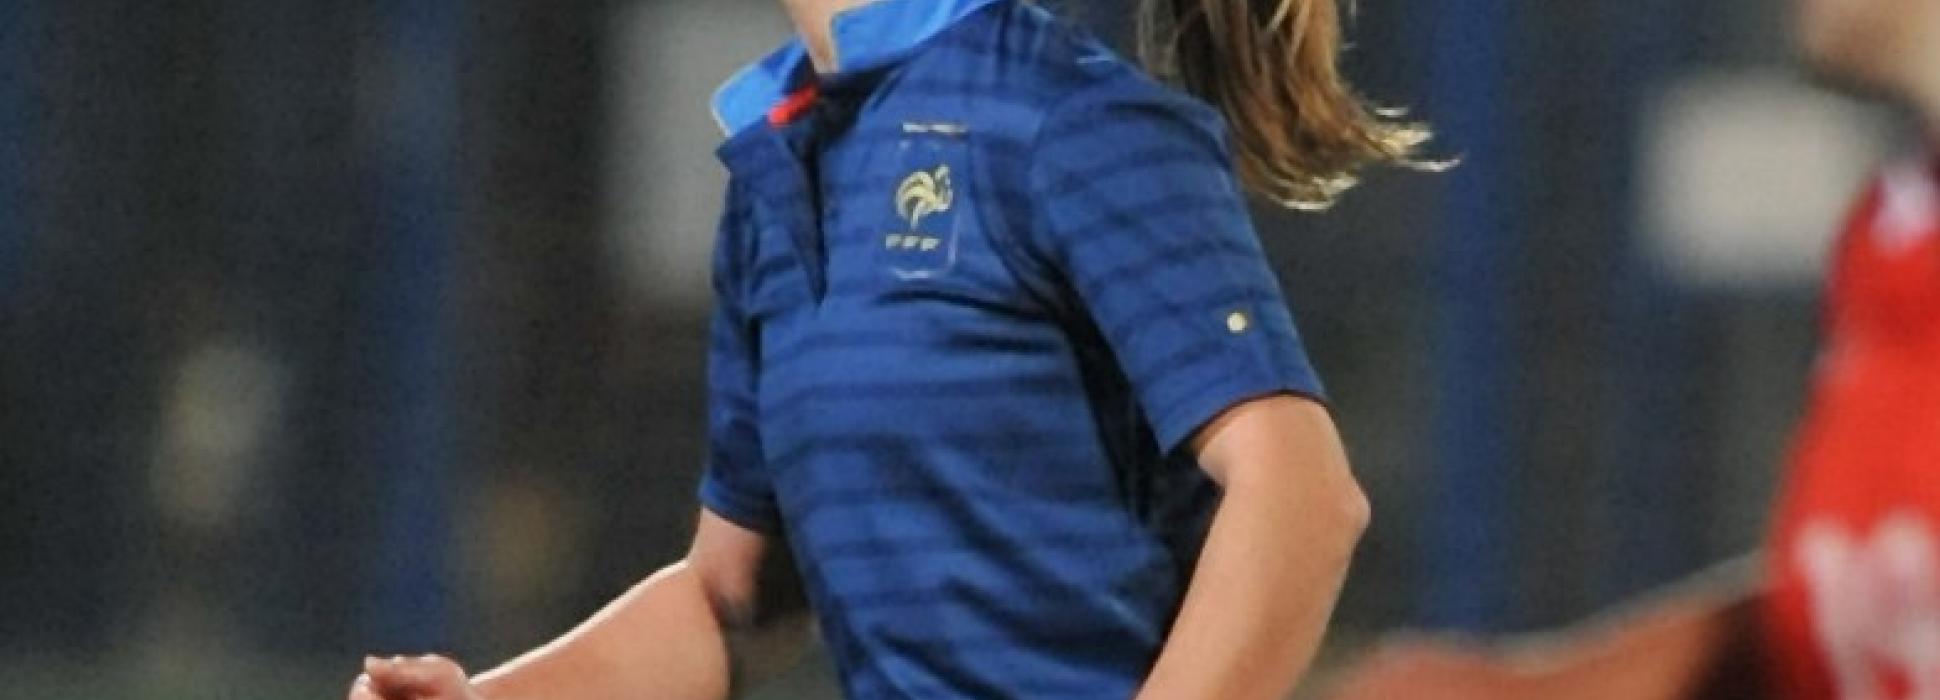 The footballer Gaëtane Thiney, native of Troyes, prepares for the Women's World Cup from June 7 to July 7, 2019